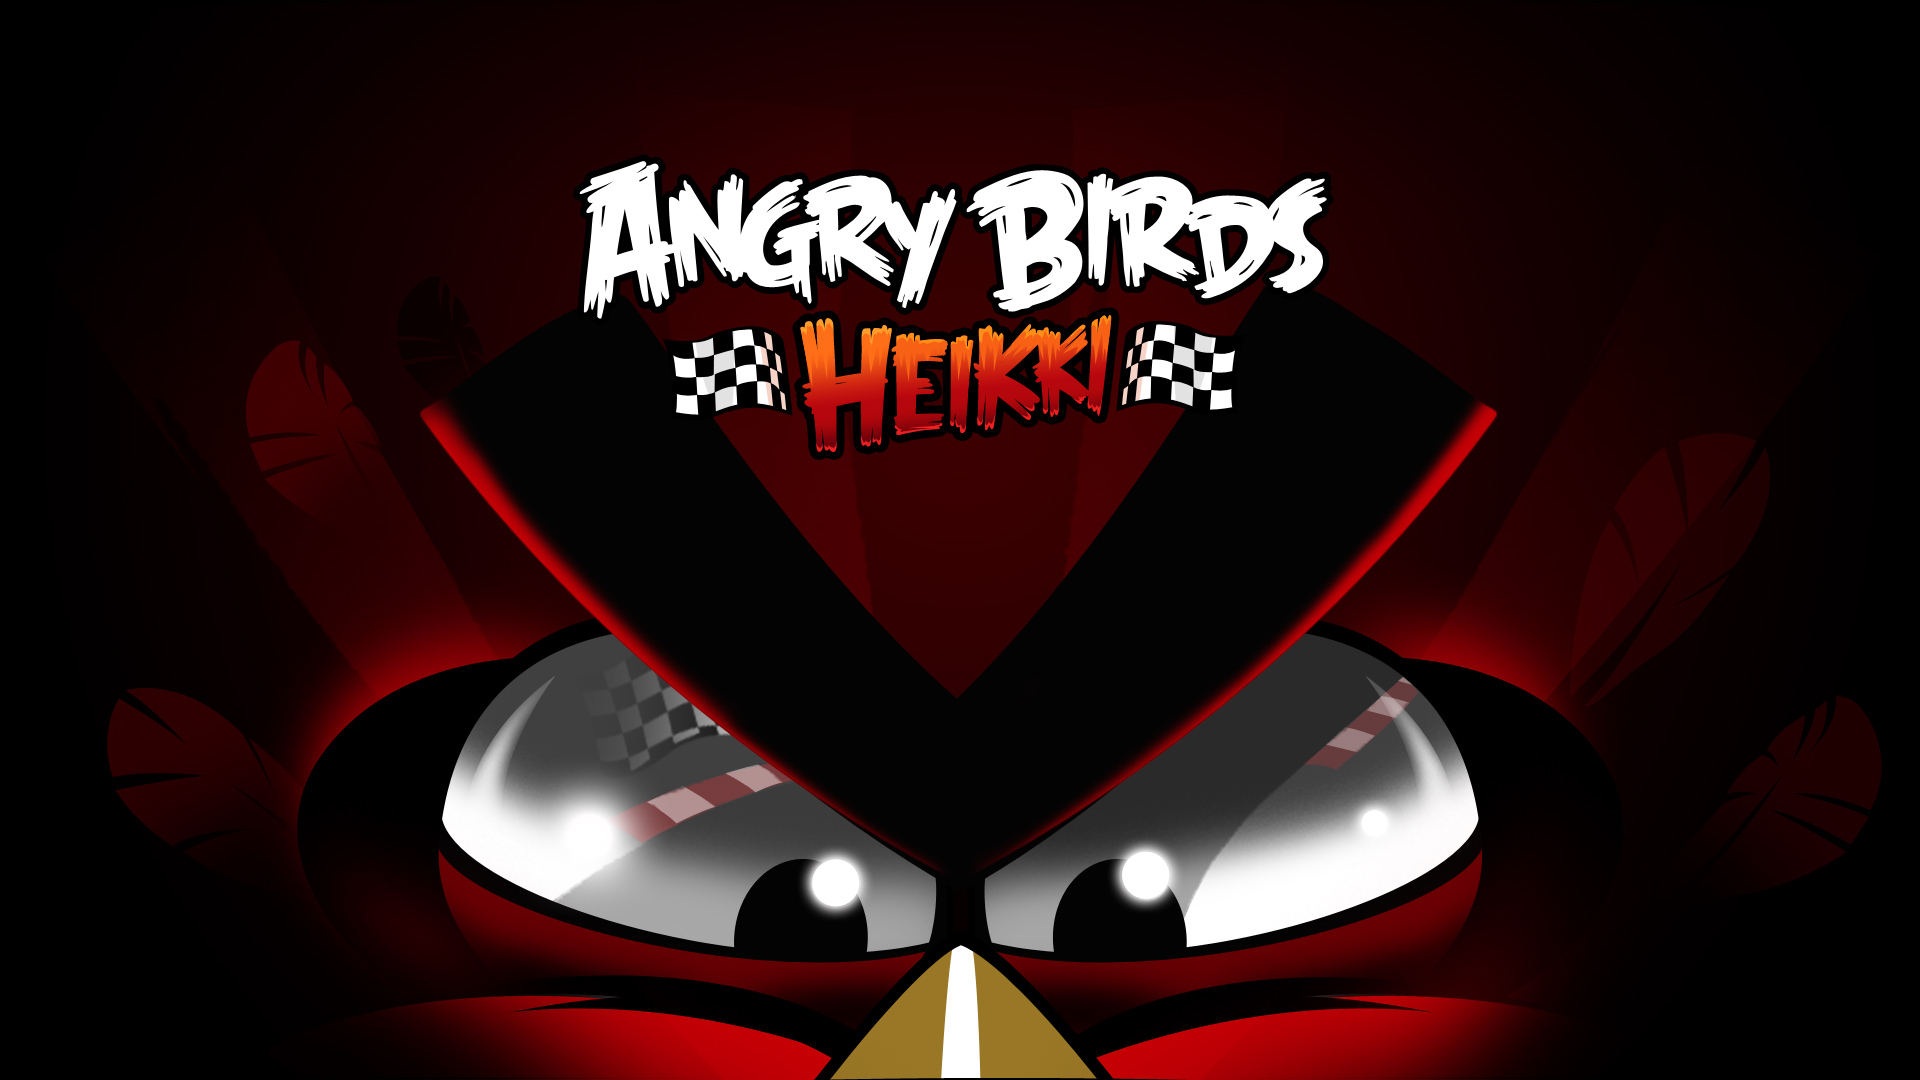 Desktop Hd Angry Bird Space Wallpaper - Angry Birds Wallpaper For Android - HD Wallpaper 